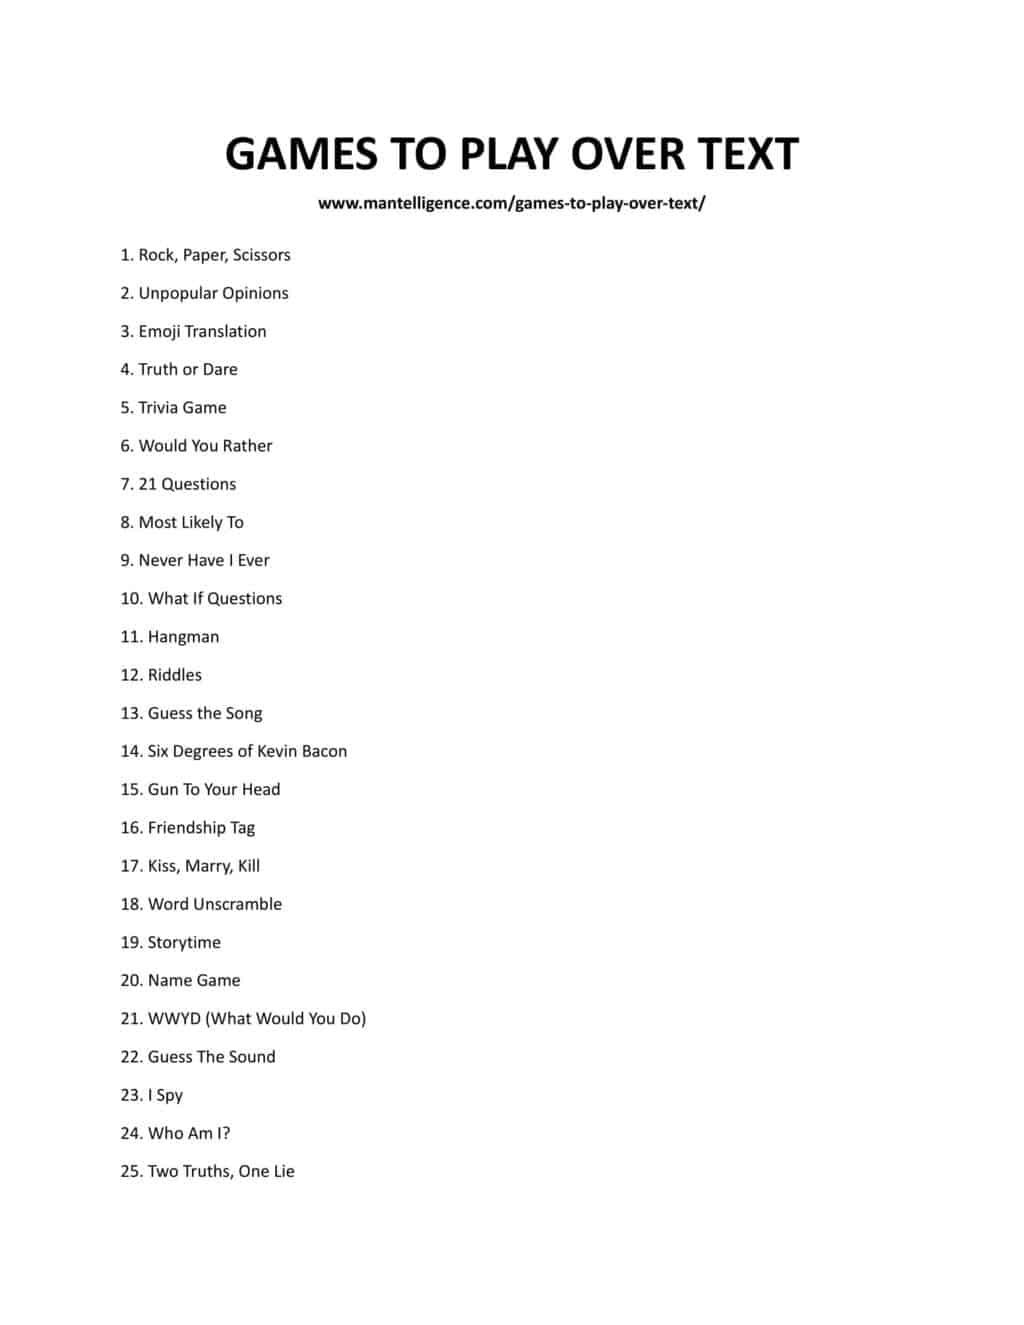 60+ Texting Games To Play With Friends